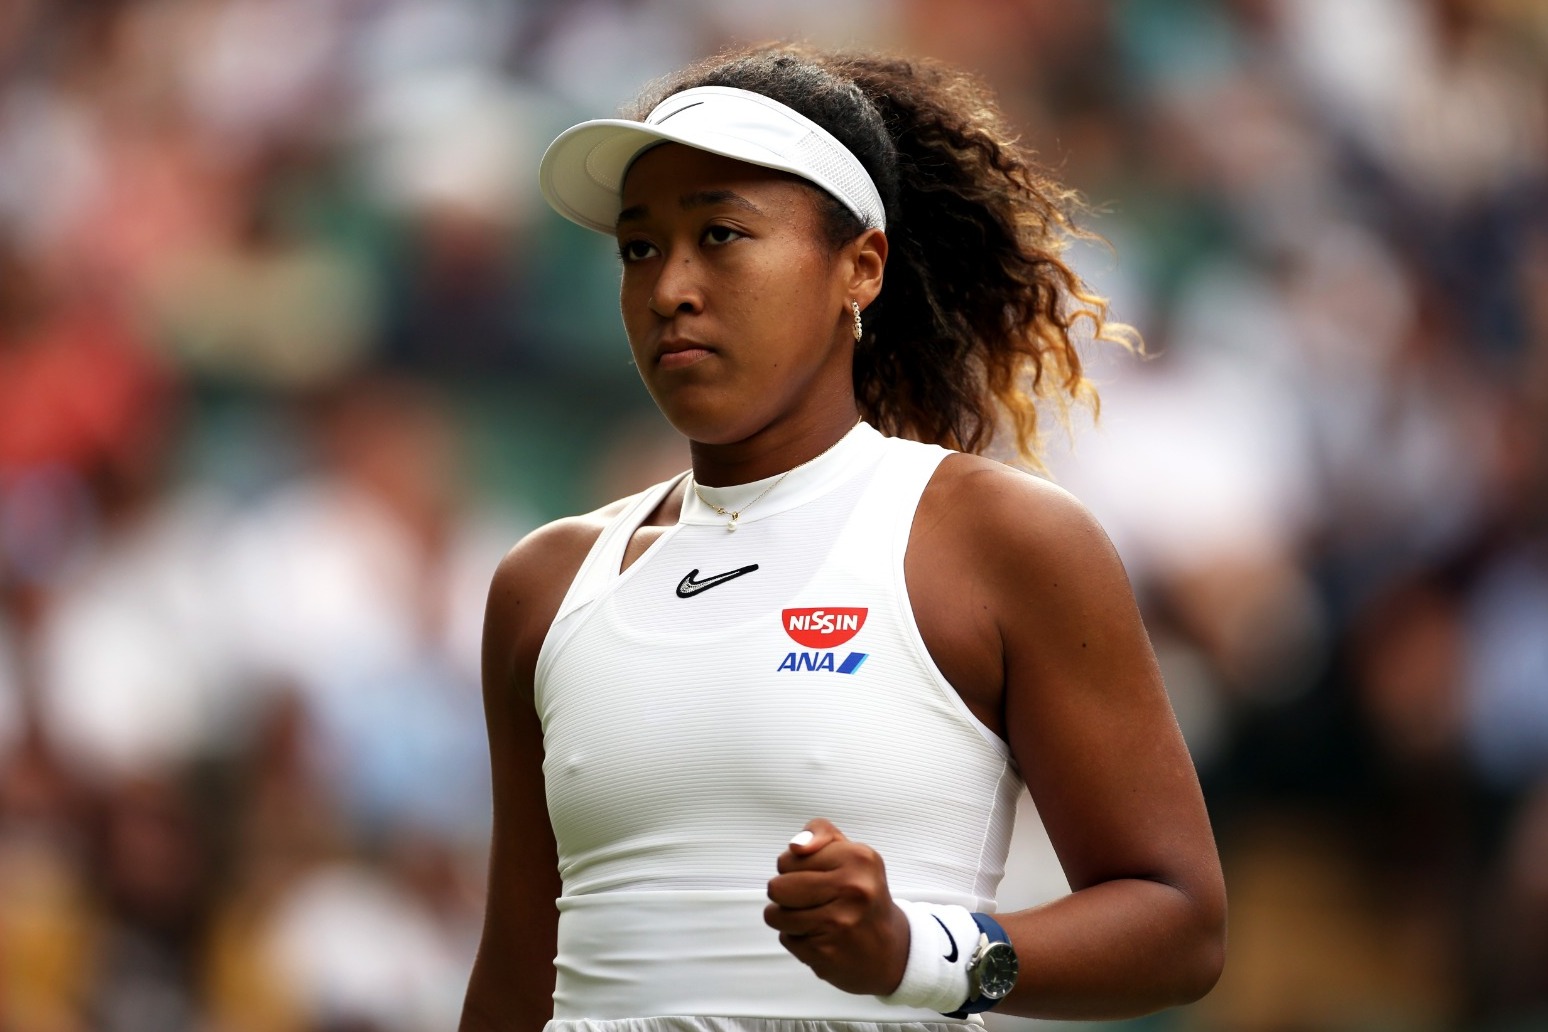 Grand slams offer support to Naomi Osaka following French Open withdrawal 